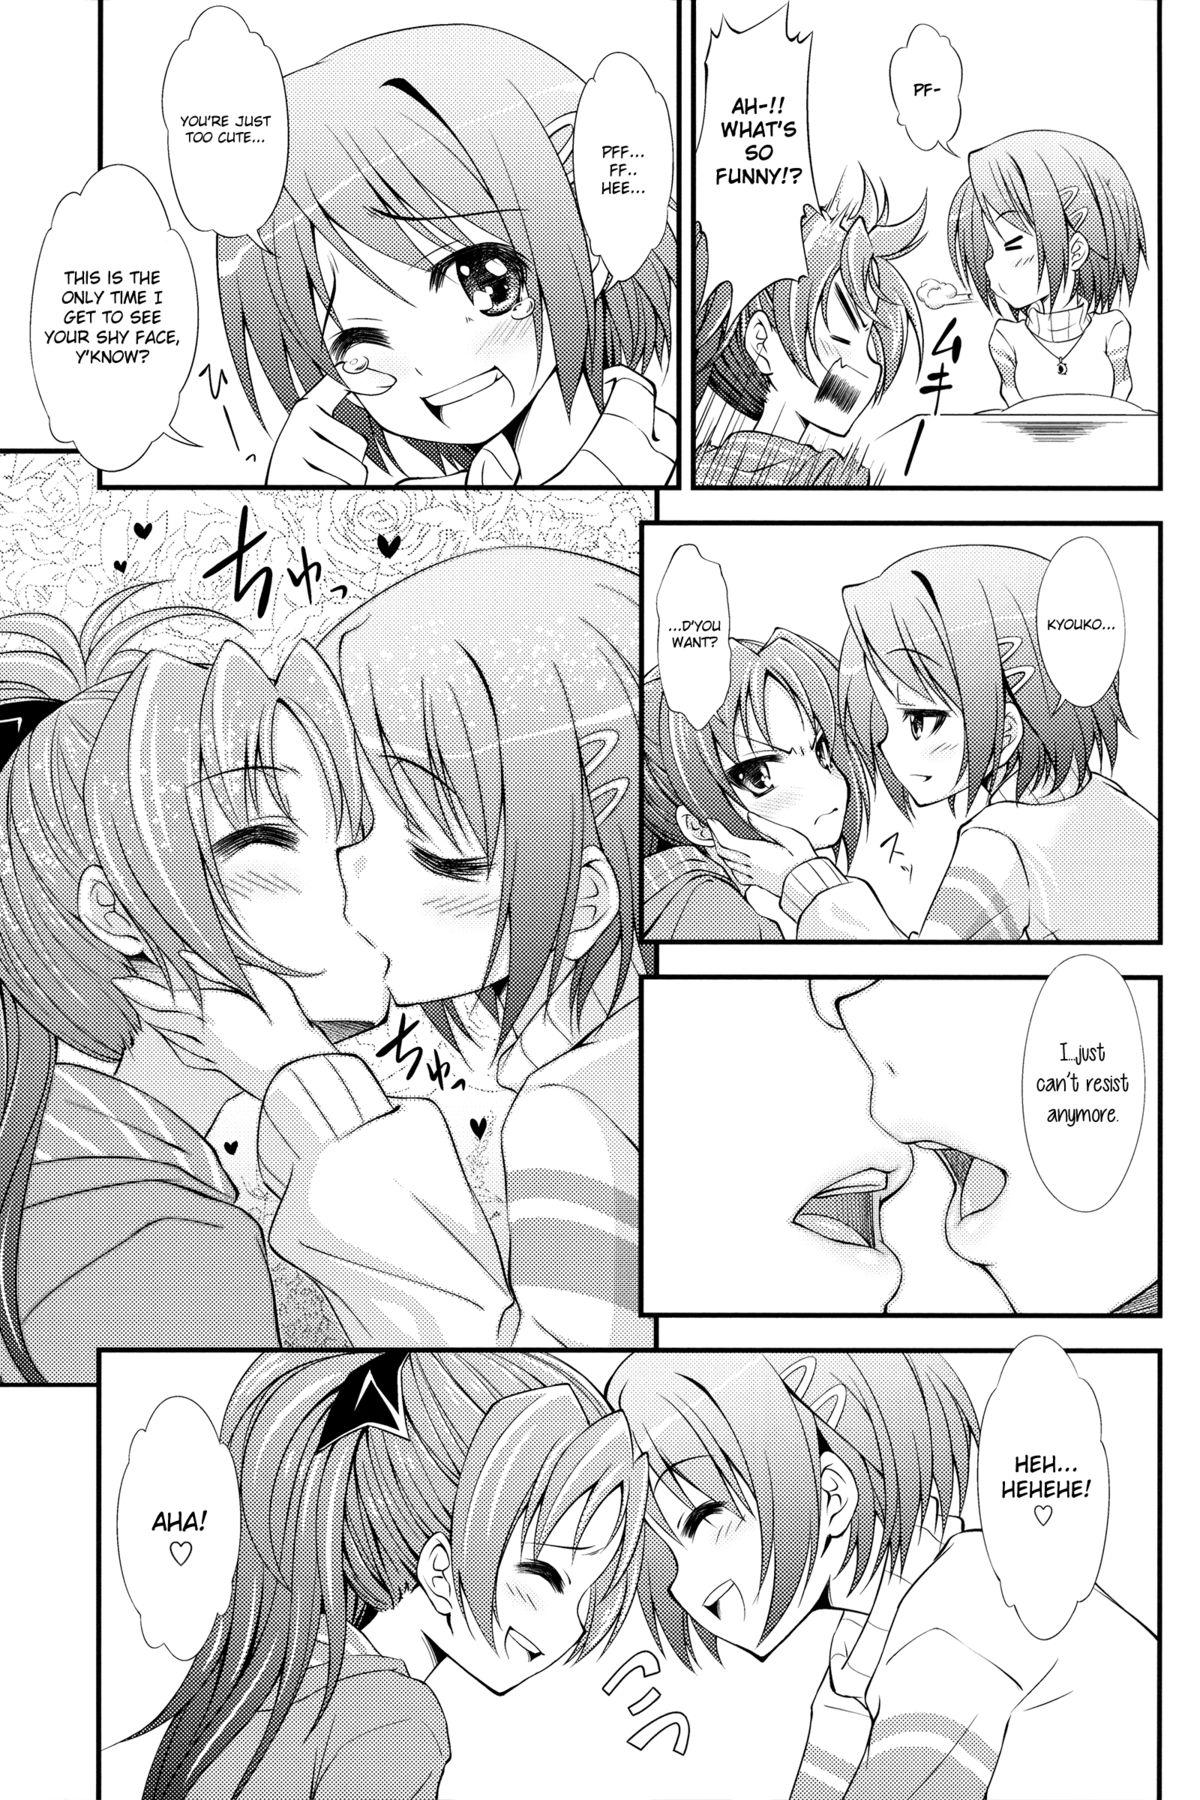 Amateurs Gone Wild Lovely Girls' Lily vol.3 - Puella magi madoka magica Price - Page 12